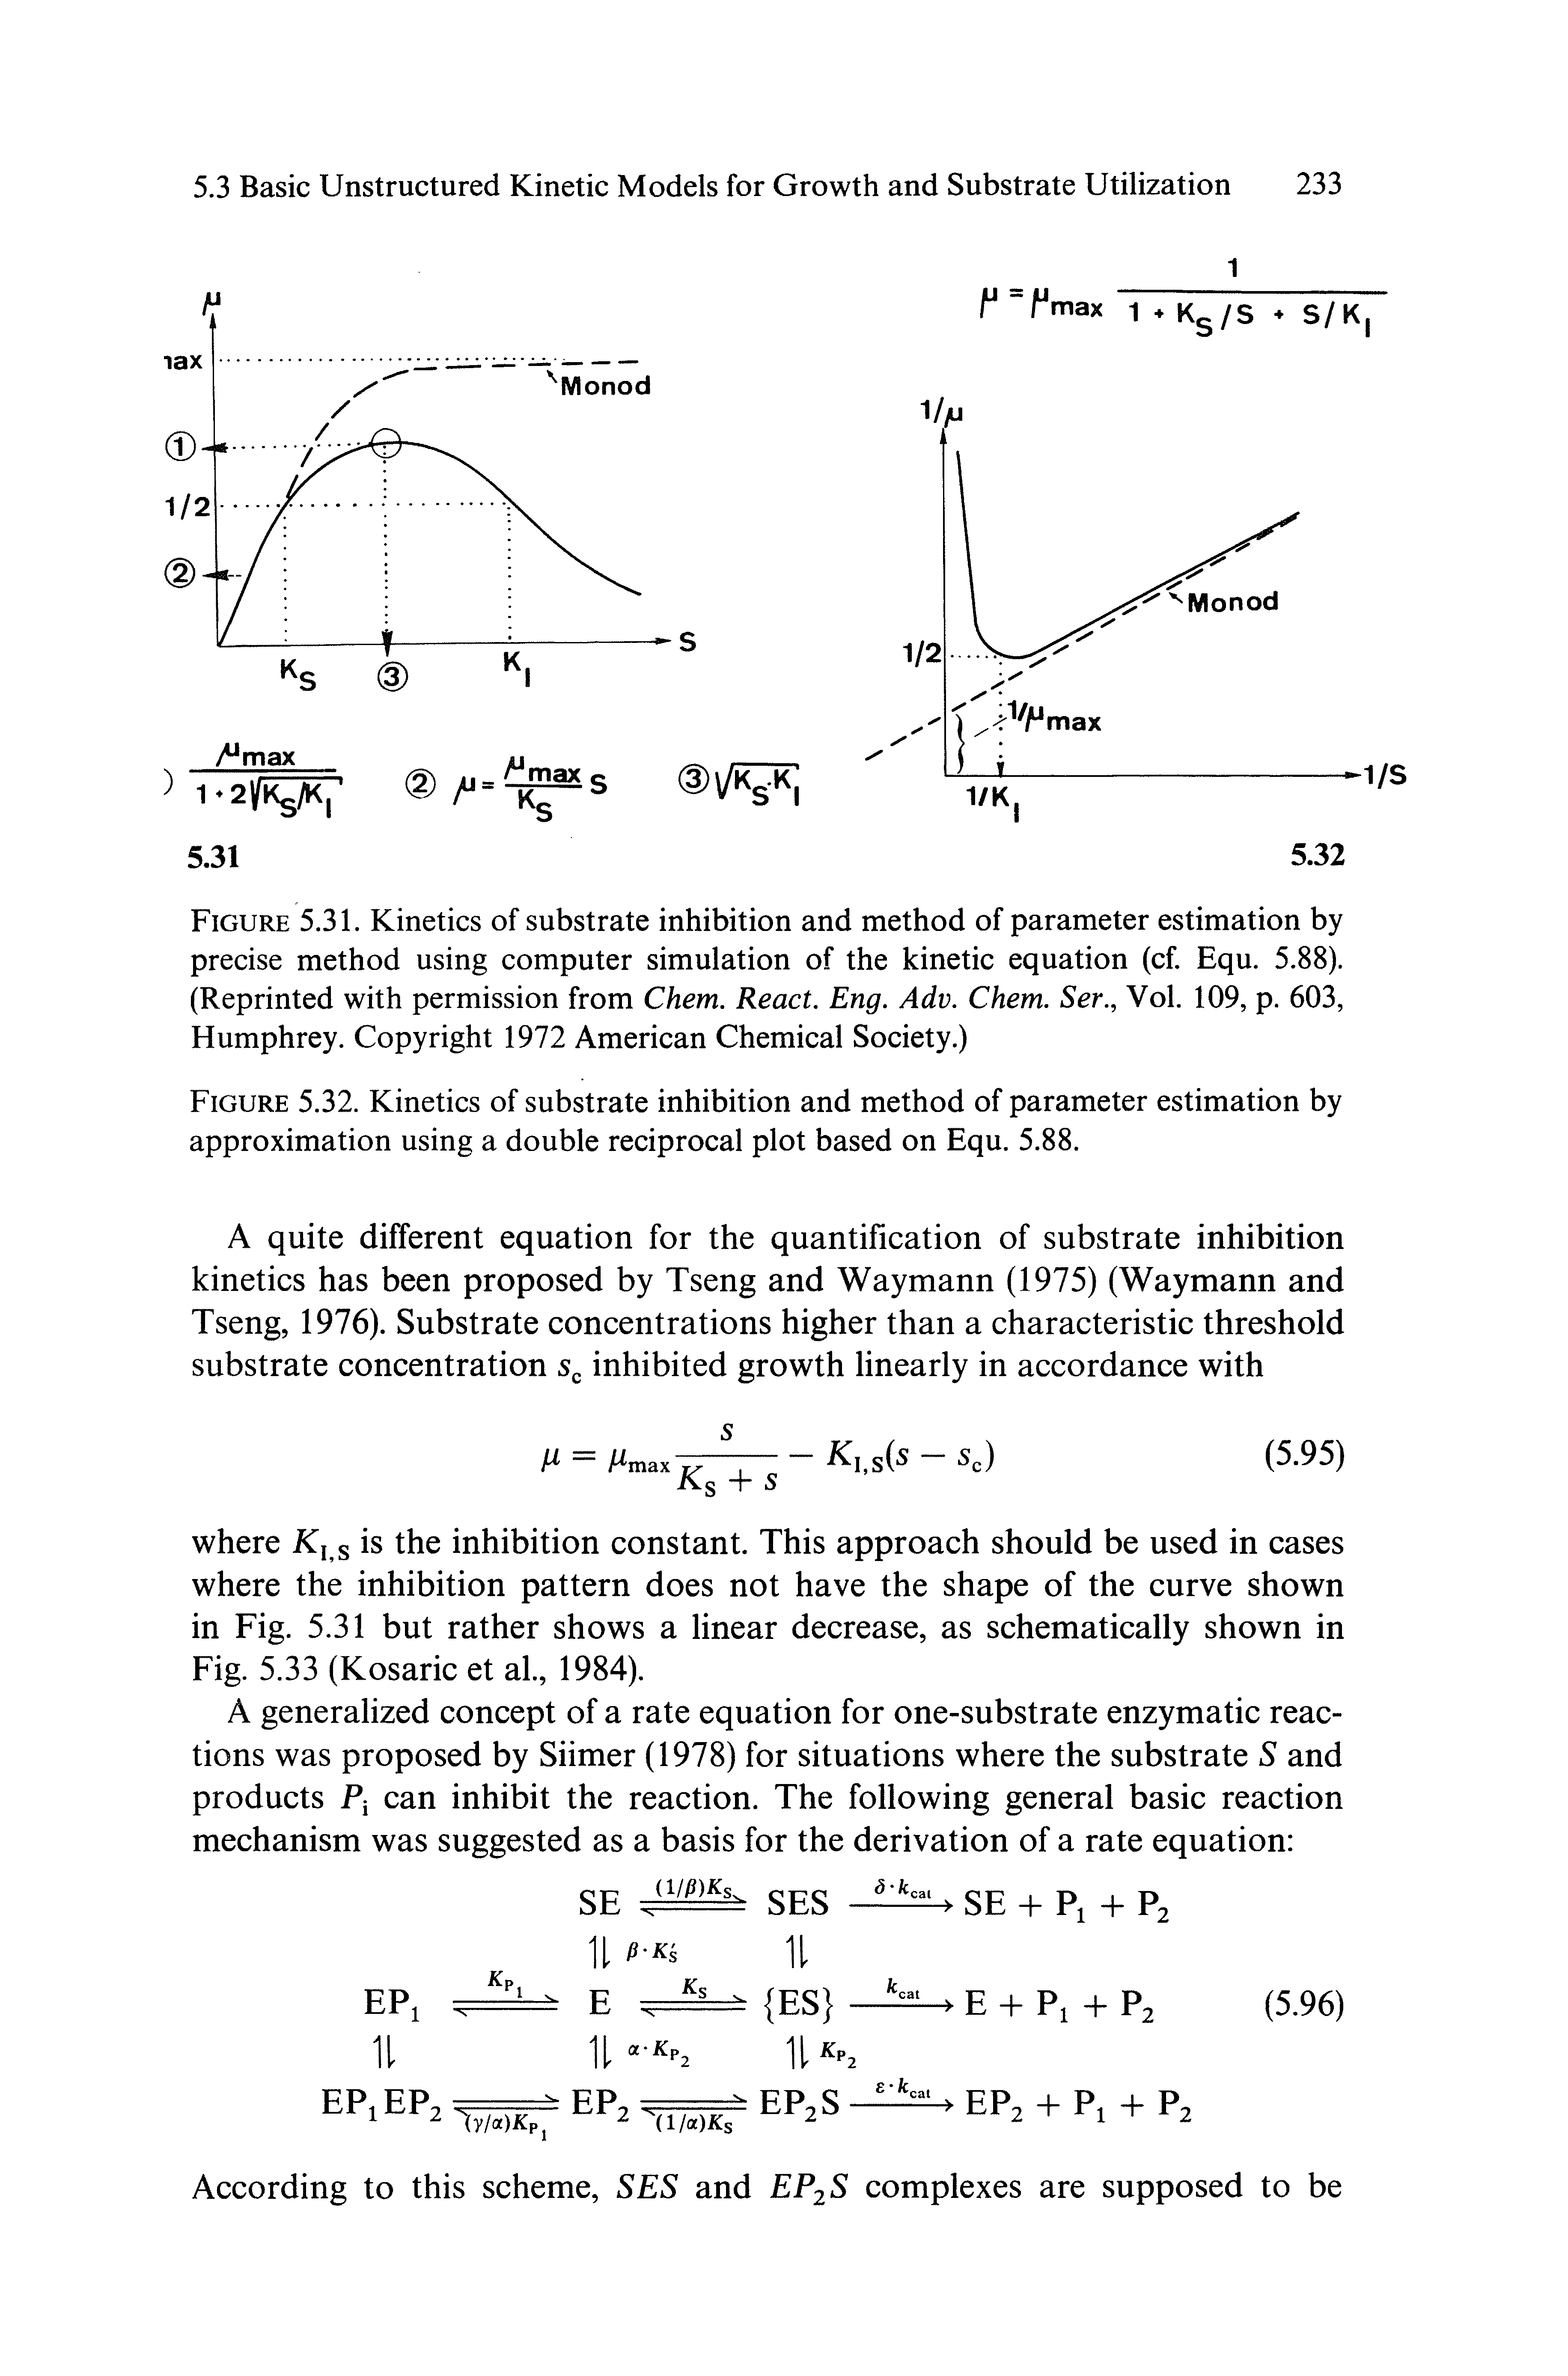 Figure 5.31. Kinetics of substrate inhibition and method of parameter estimation by precise method using computer simulation of the kinetic equation (cf. Equ. 5.88). (Reprinted with permission from Chem. React. Eng. Adv. Chem. Ser., Vol. 109, p. 603, Humphrey. Copyright 1972 American Chemical Society.)...